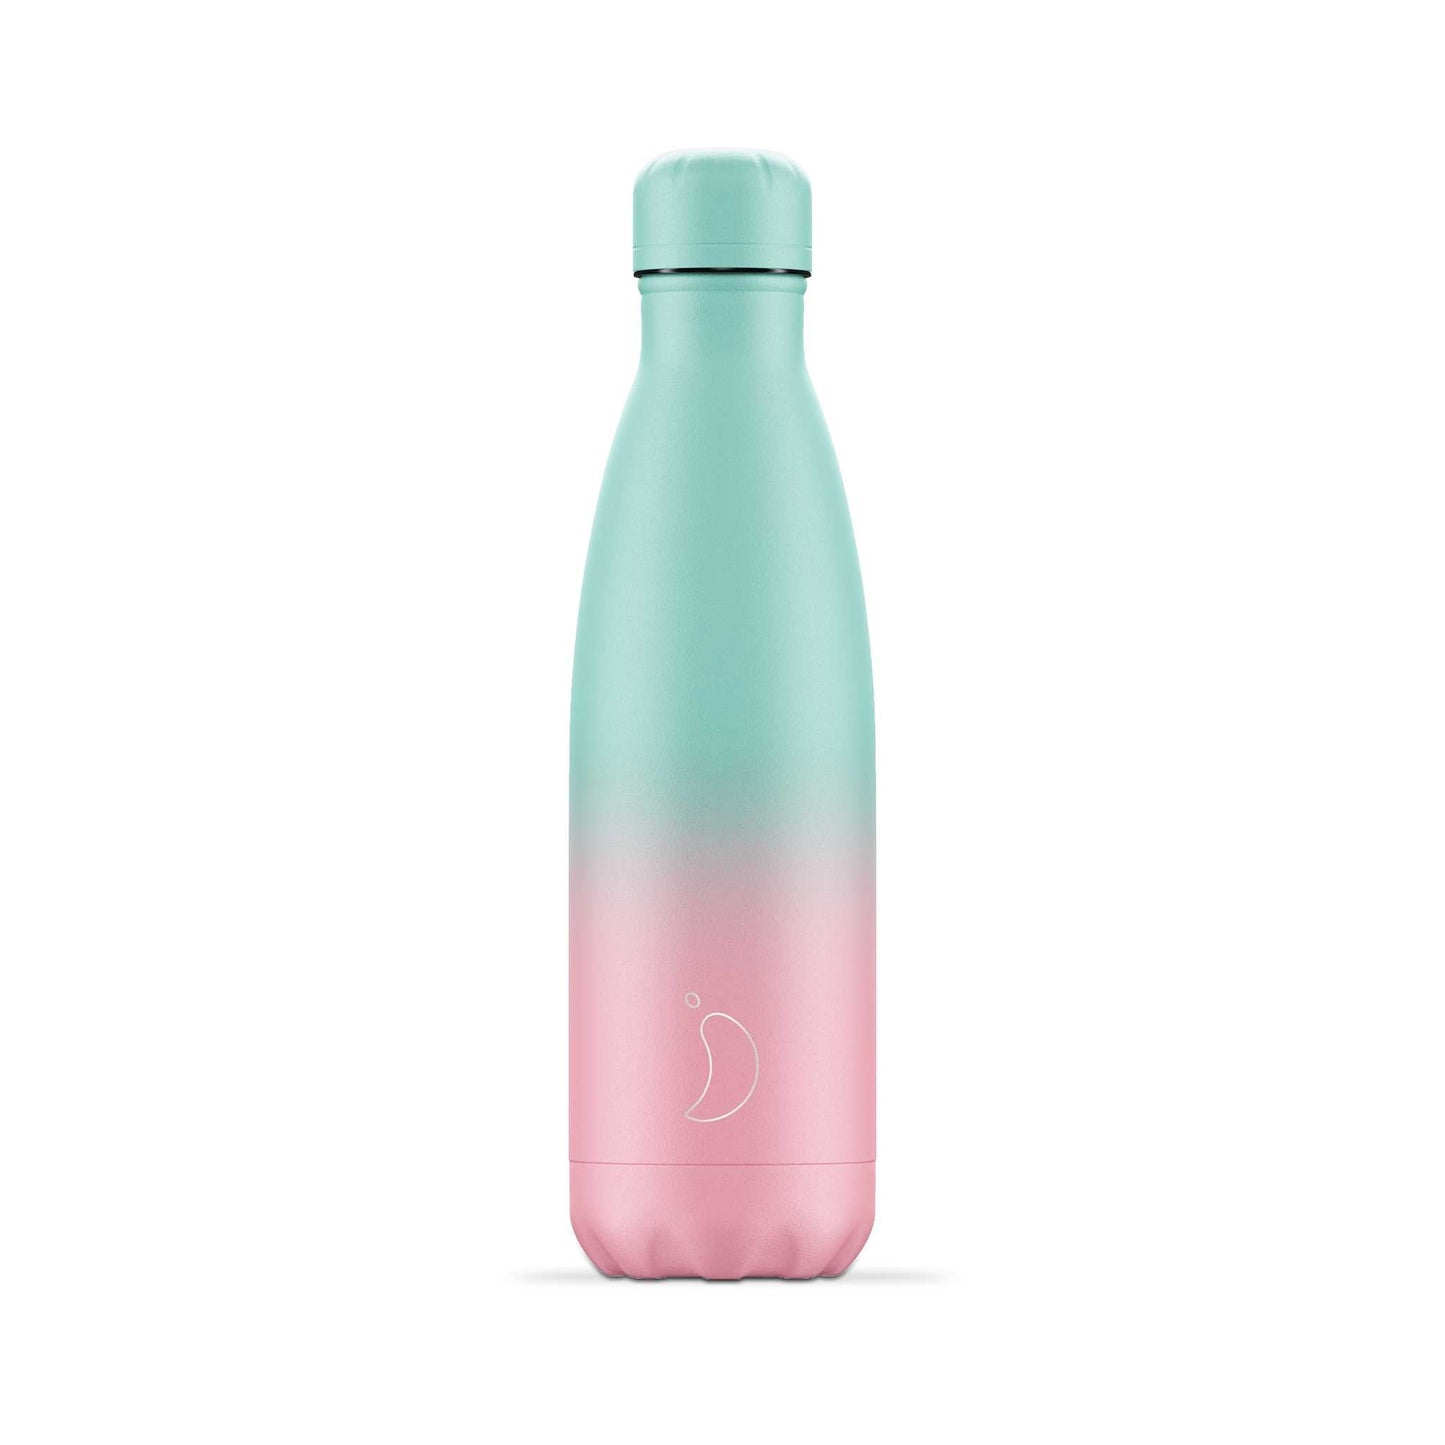 Chilly's Water Bottles Chilly's Reusable Bottle - 500ml, S/Steel, Pink & Turquoise Gradient